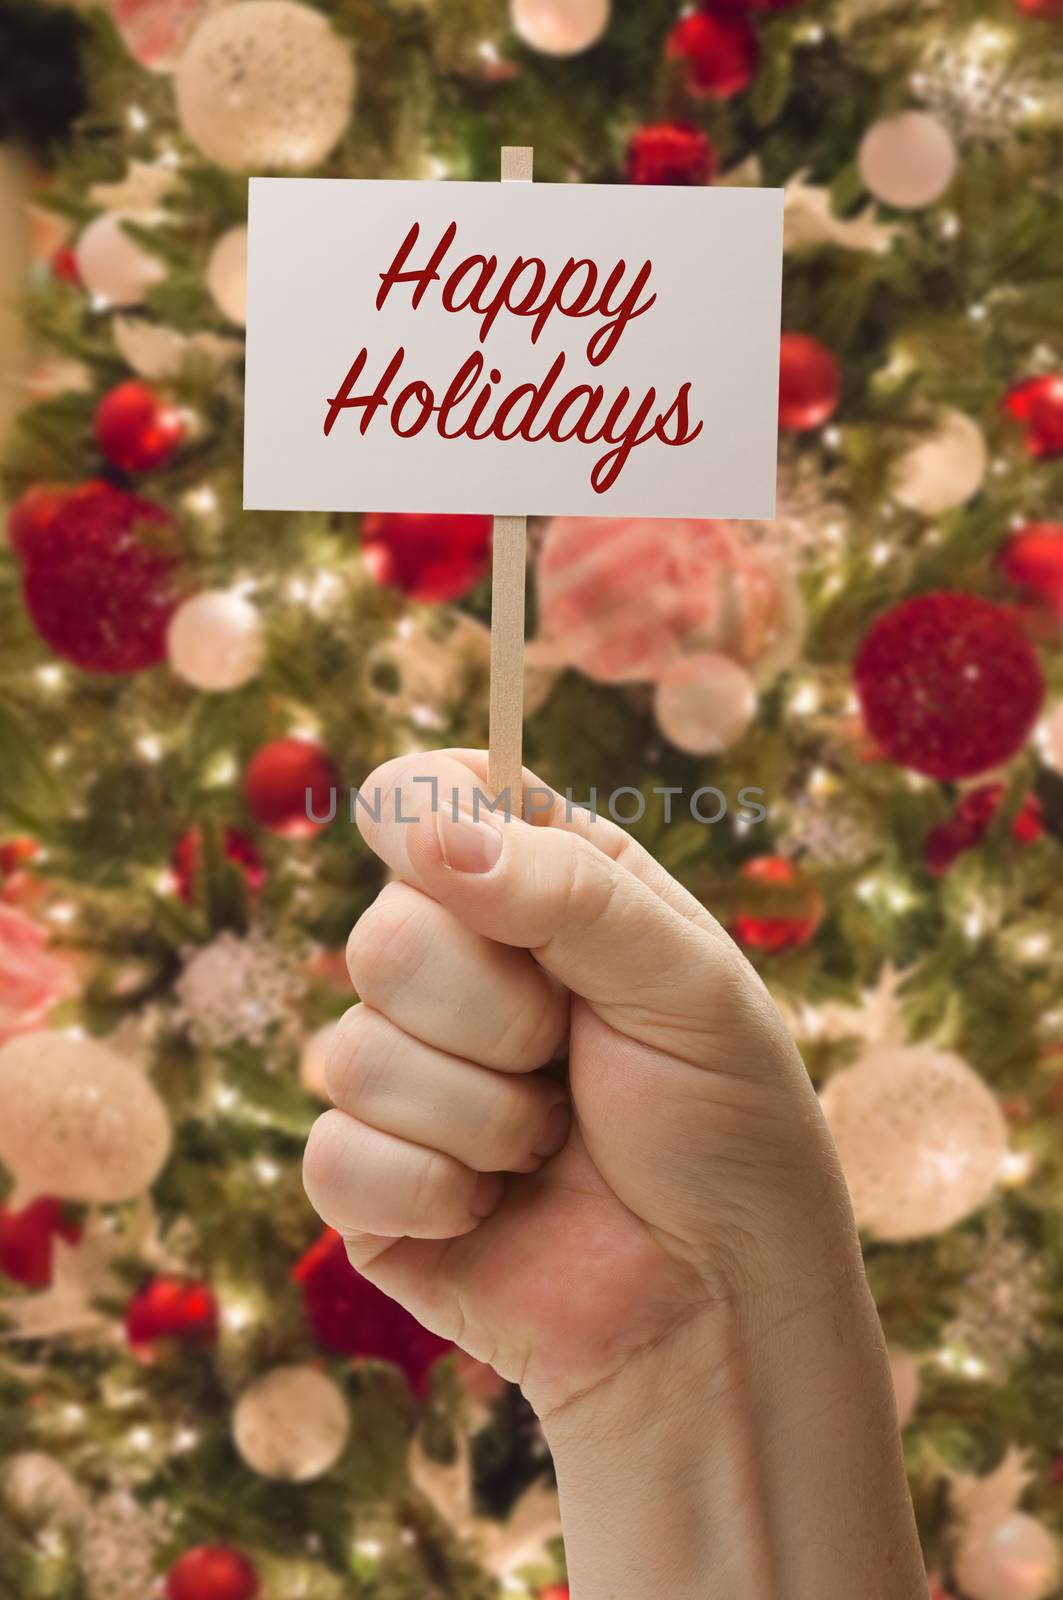 Hand Holding Happy Holidays Card In Front of Decorated Christmas Tree.